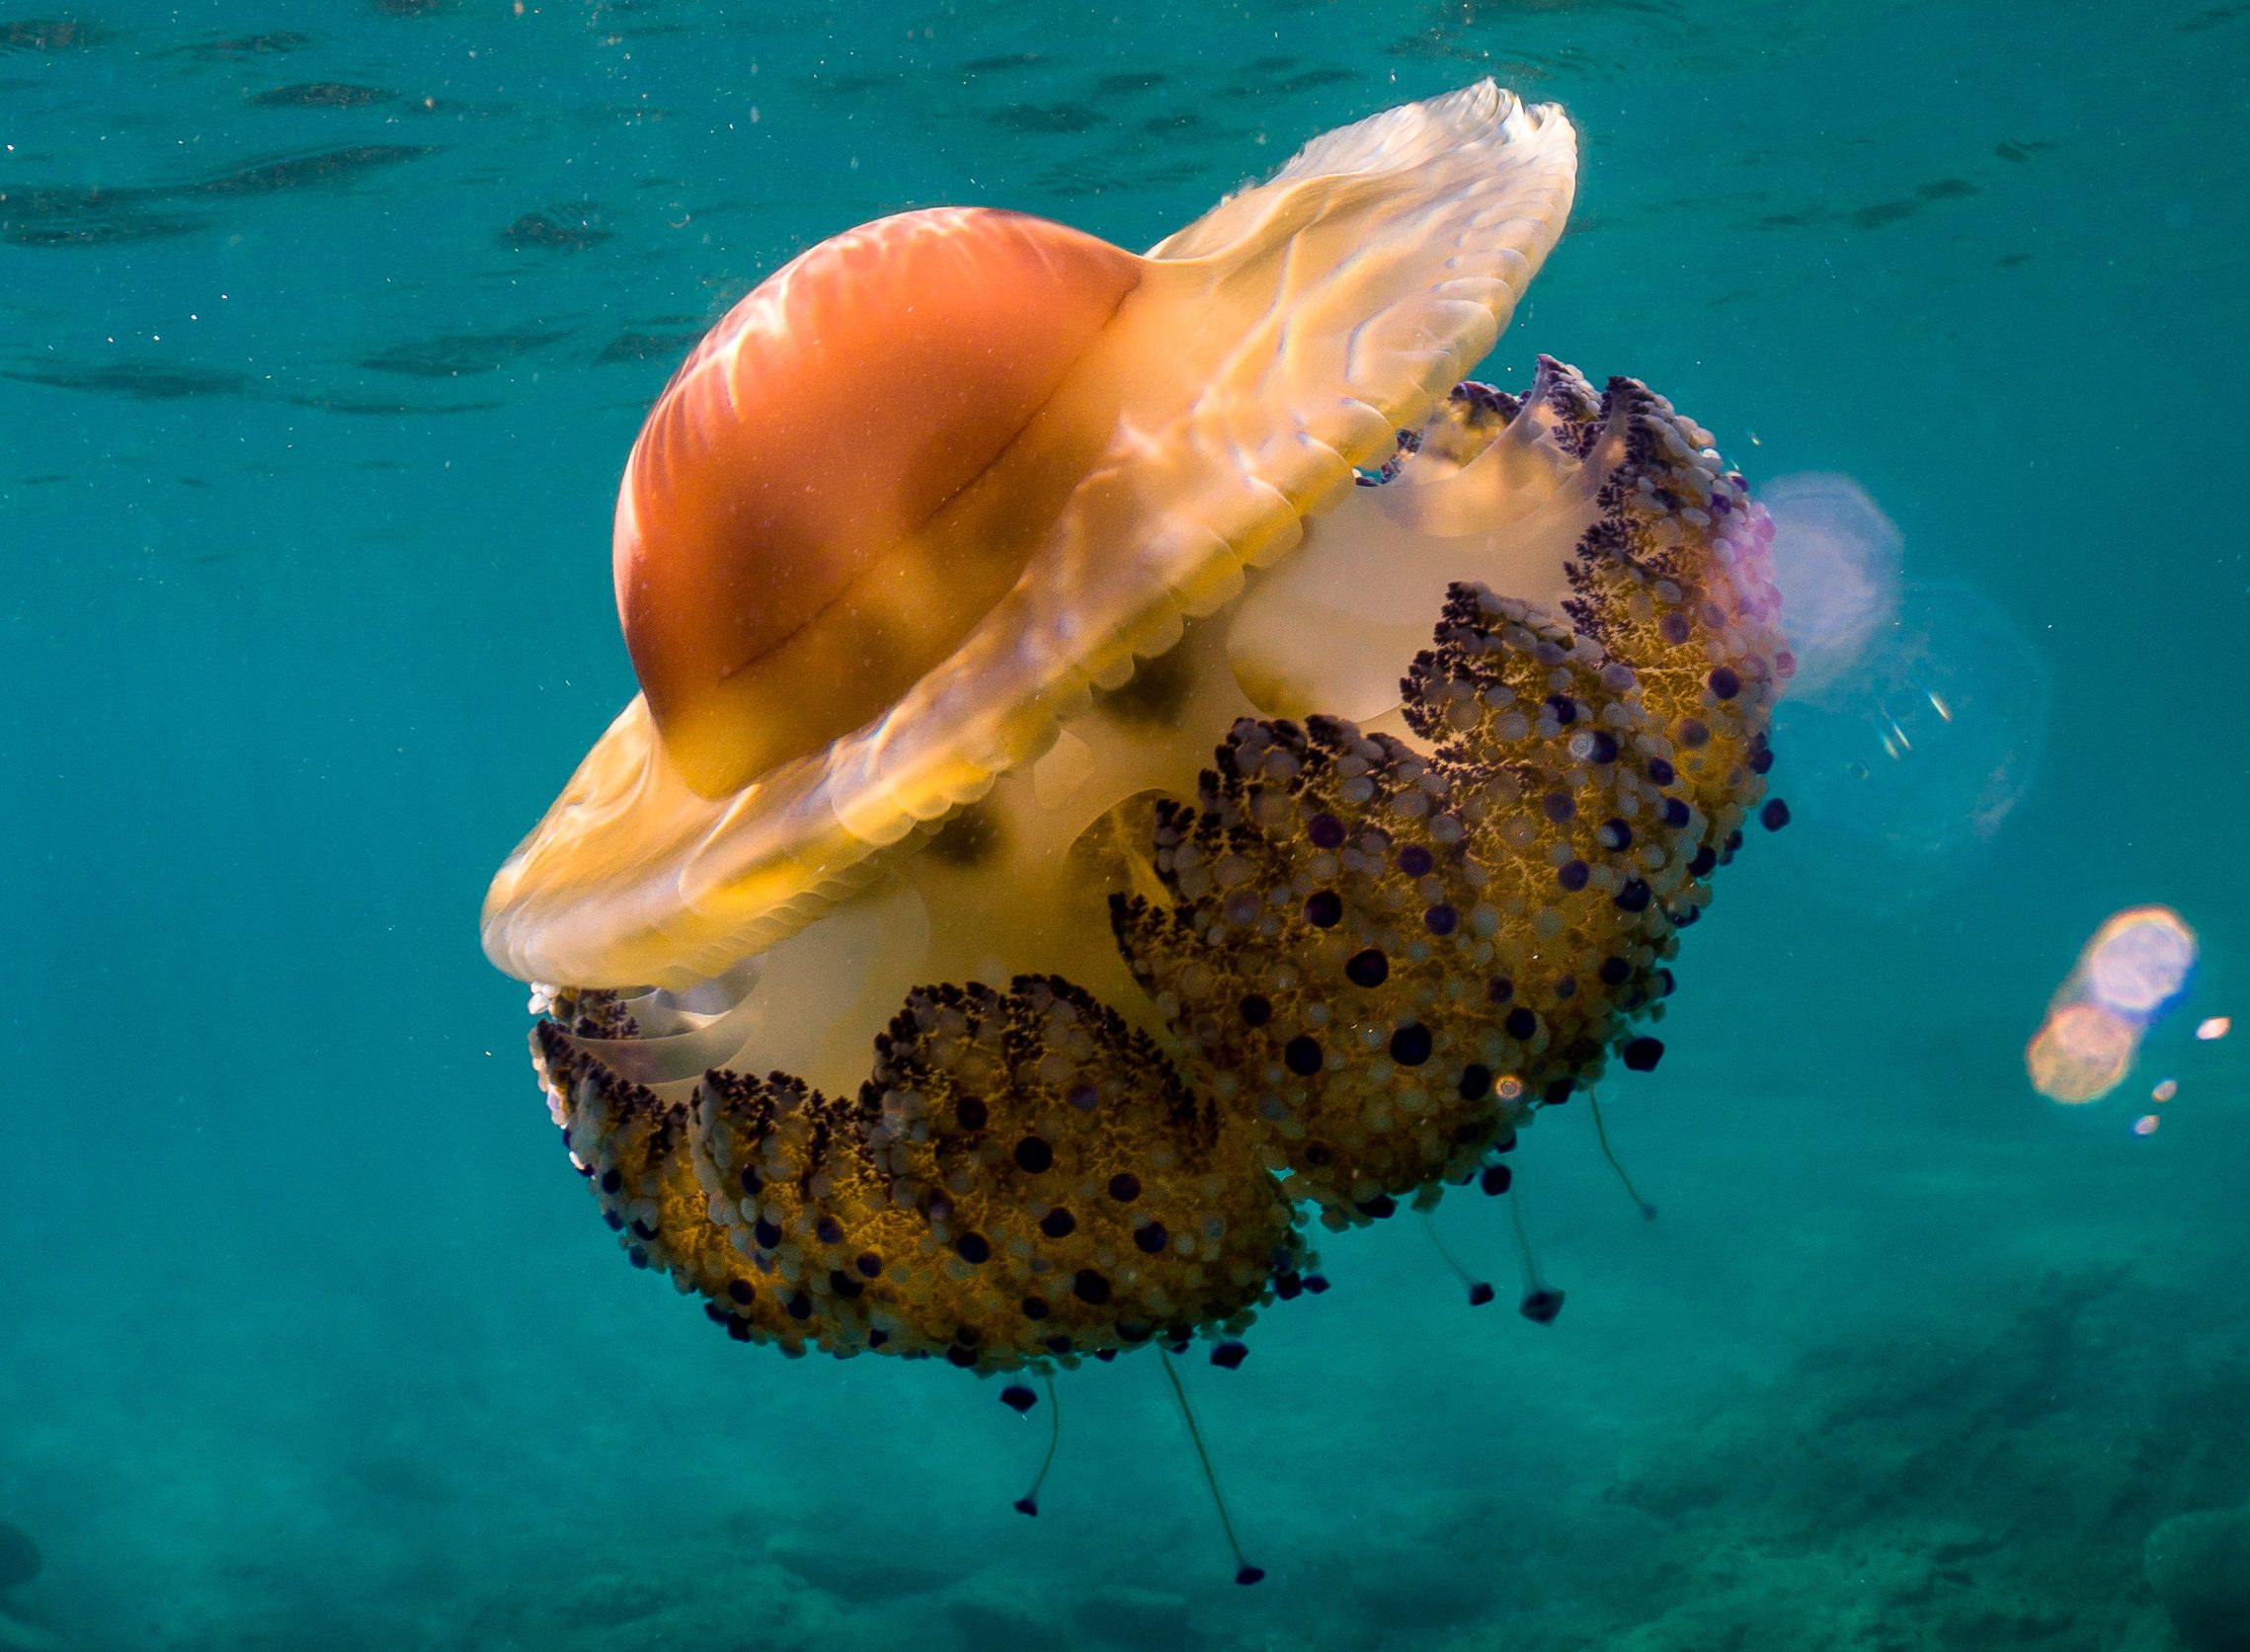 A fried egg jellyfish, also known as an egg-yolk jelly, in the ocean